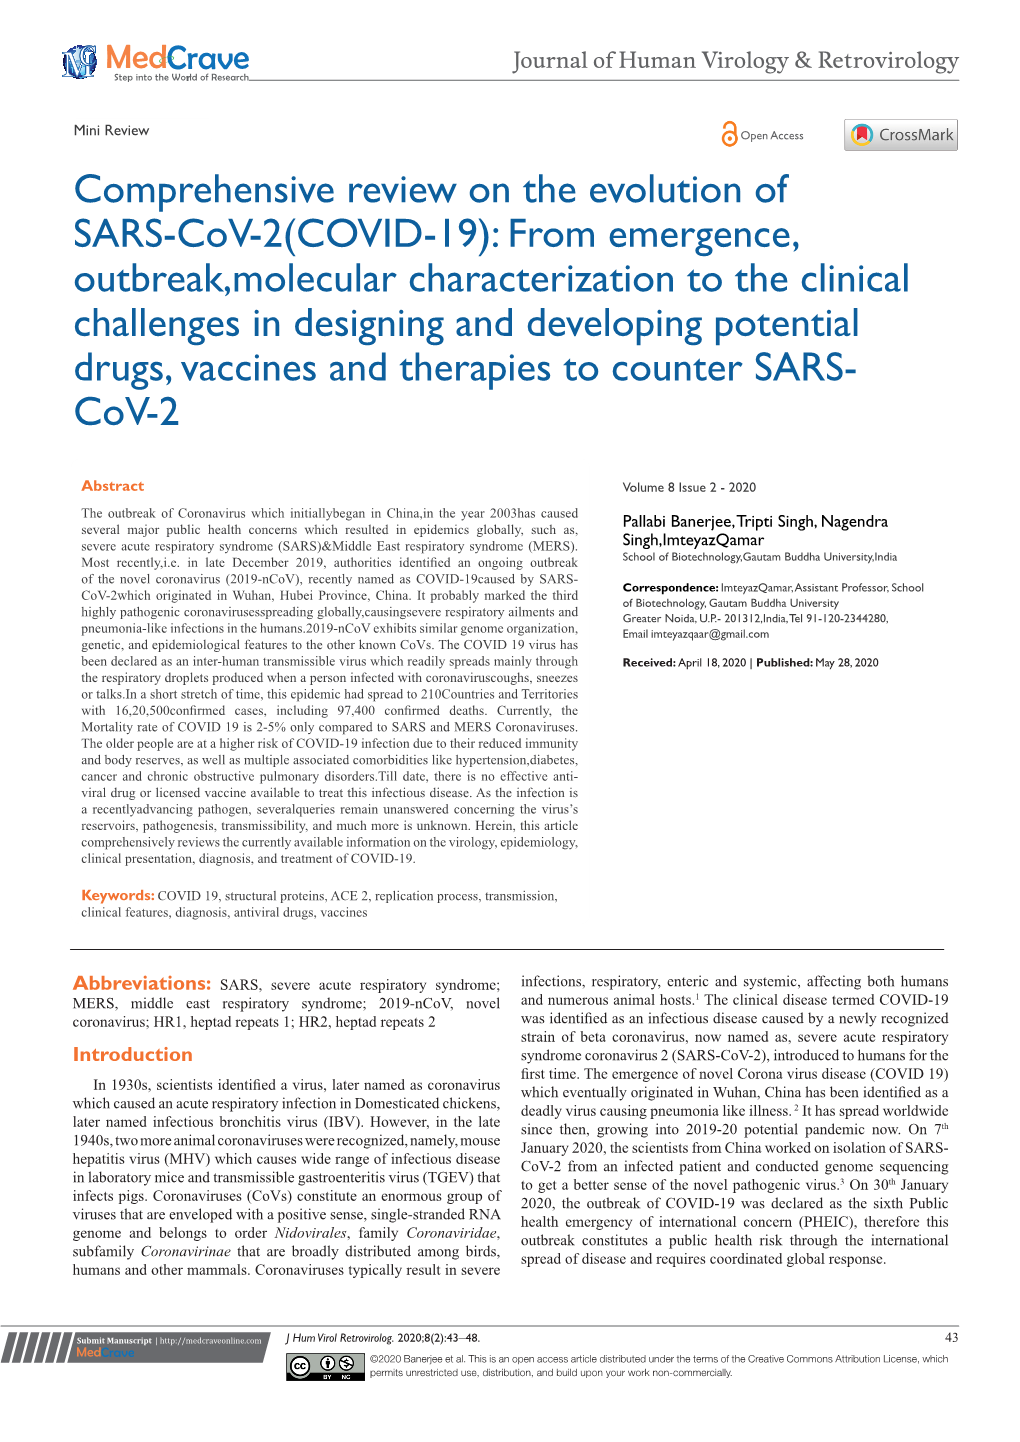 Comprehensive Review on the Evolution of SARS-Cov-2 (COVID-19)